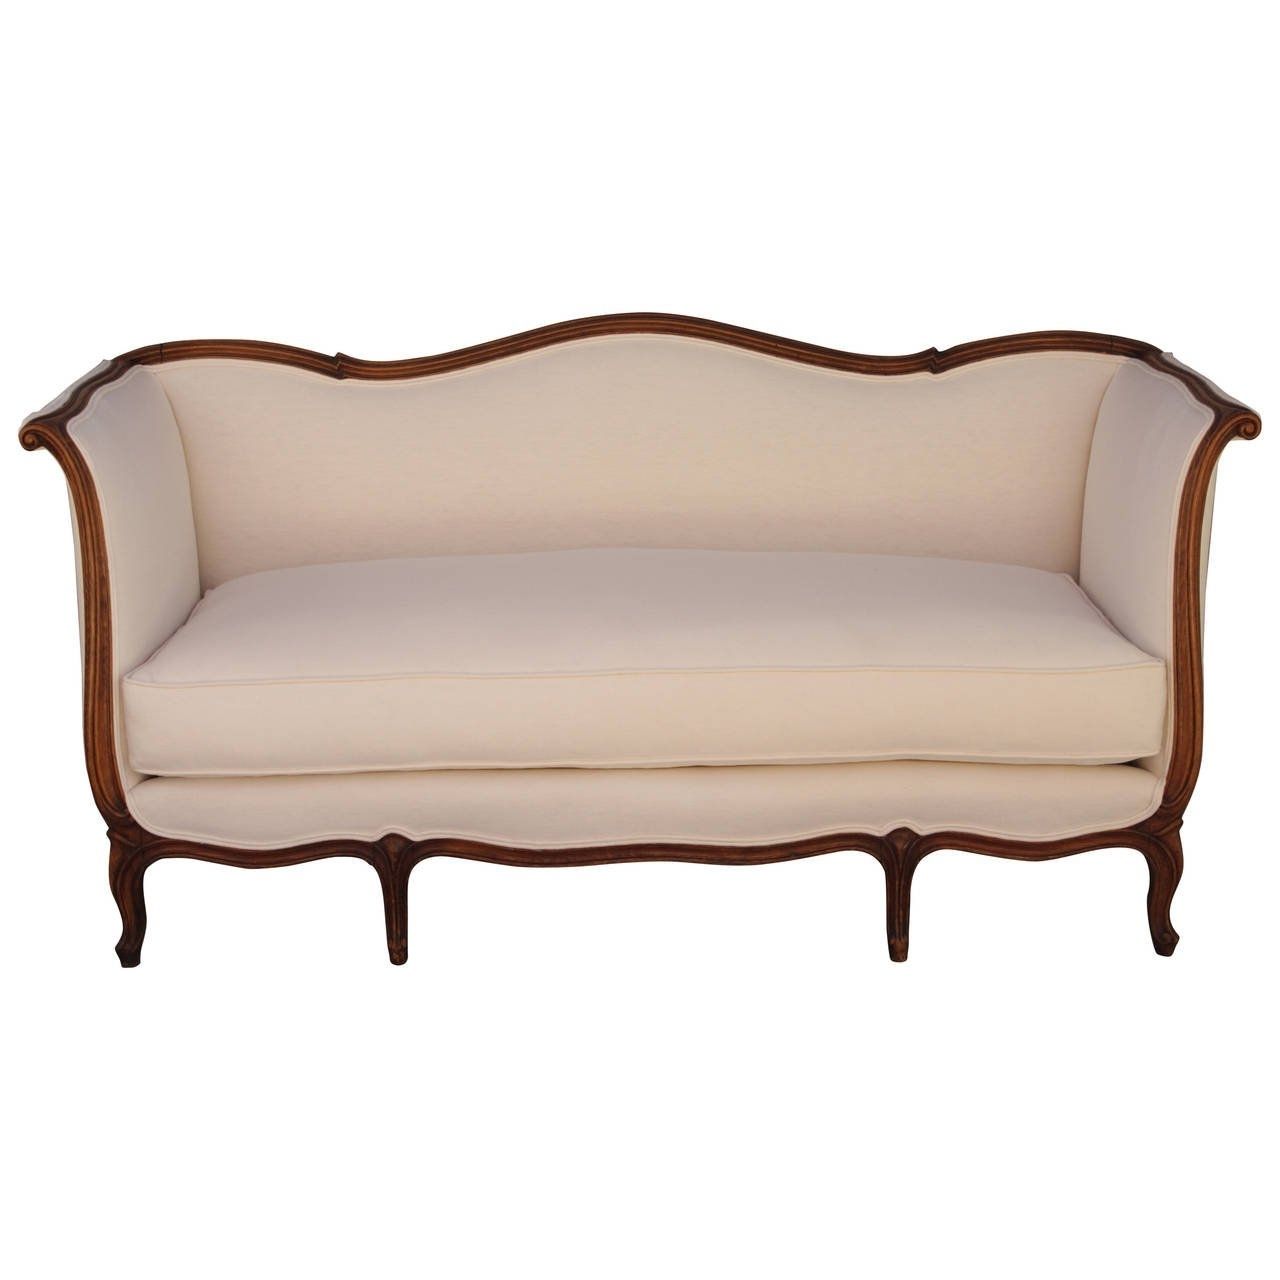 French Louis Xv Style Sofa With Linen Upholstery At 1stdibs Regarding Widely Used French Style Sofas (Photo 5 of 15)